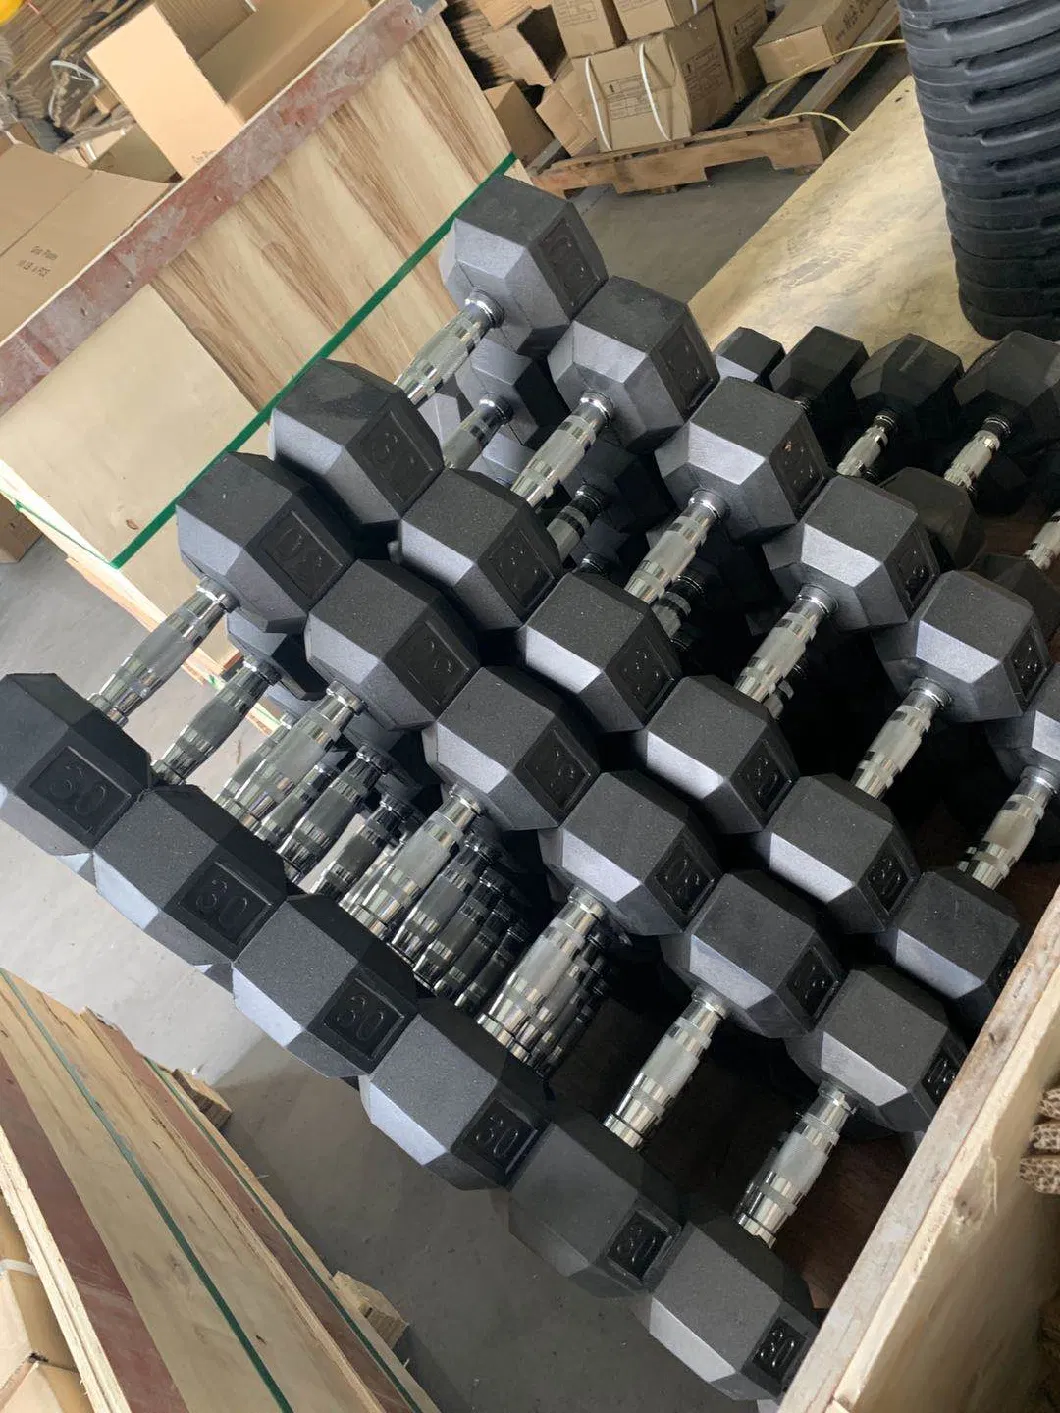 Home Gym Commercial Use Cast Iron Coated Rubber Hex Dumbbell Wholesale Factory Price